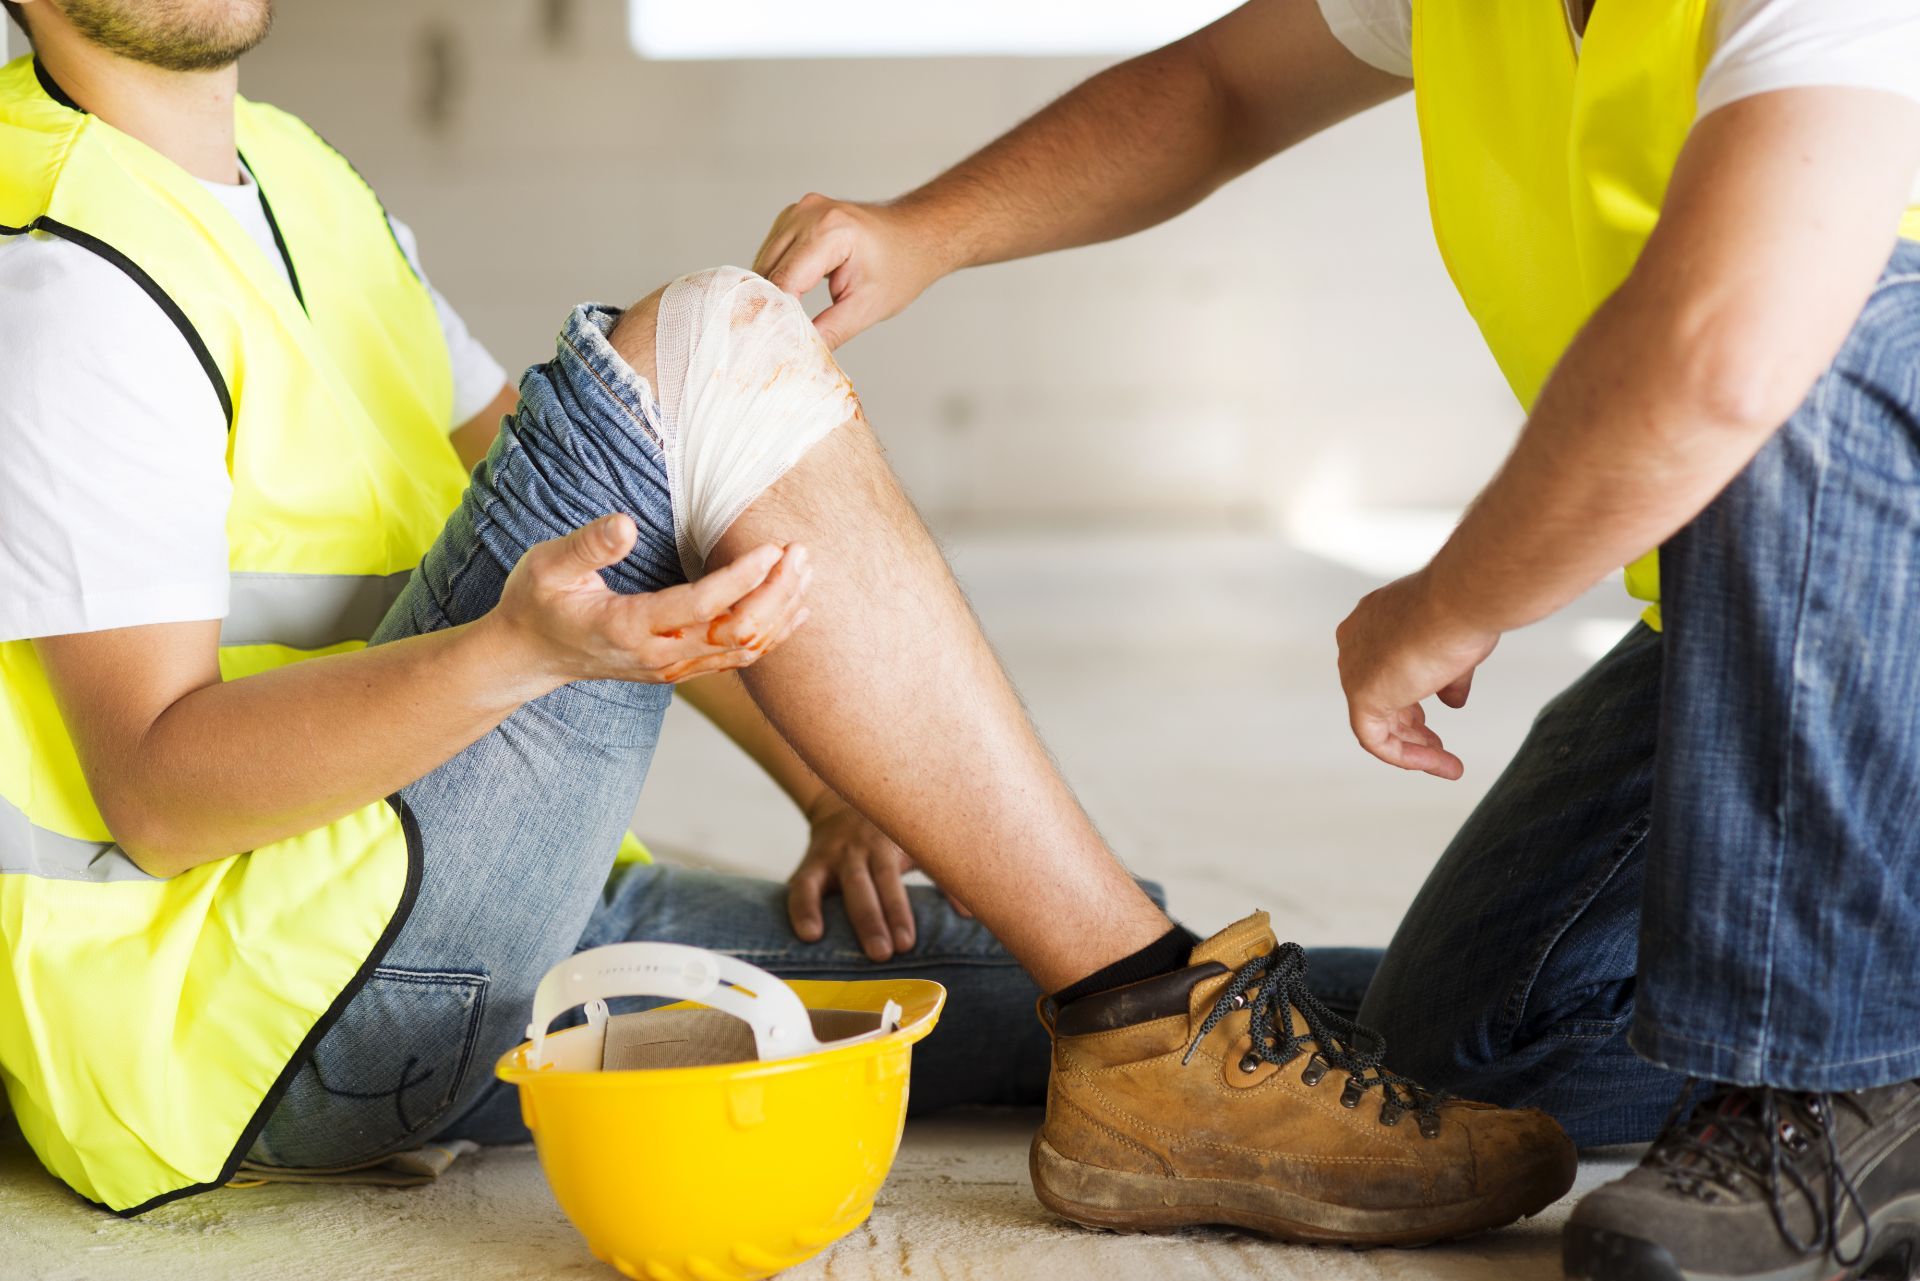 Worker with injured knee